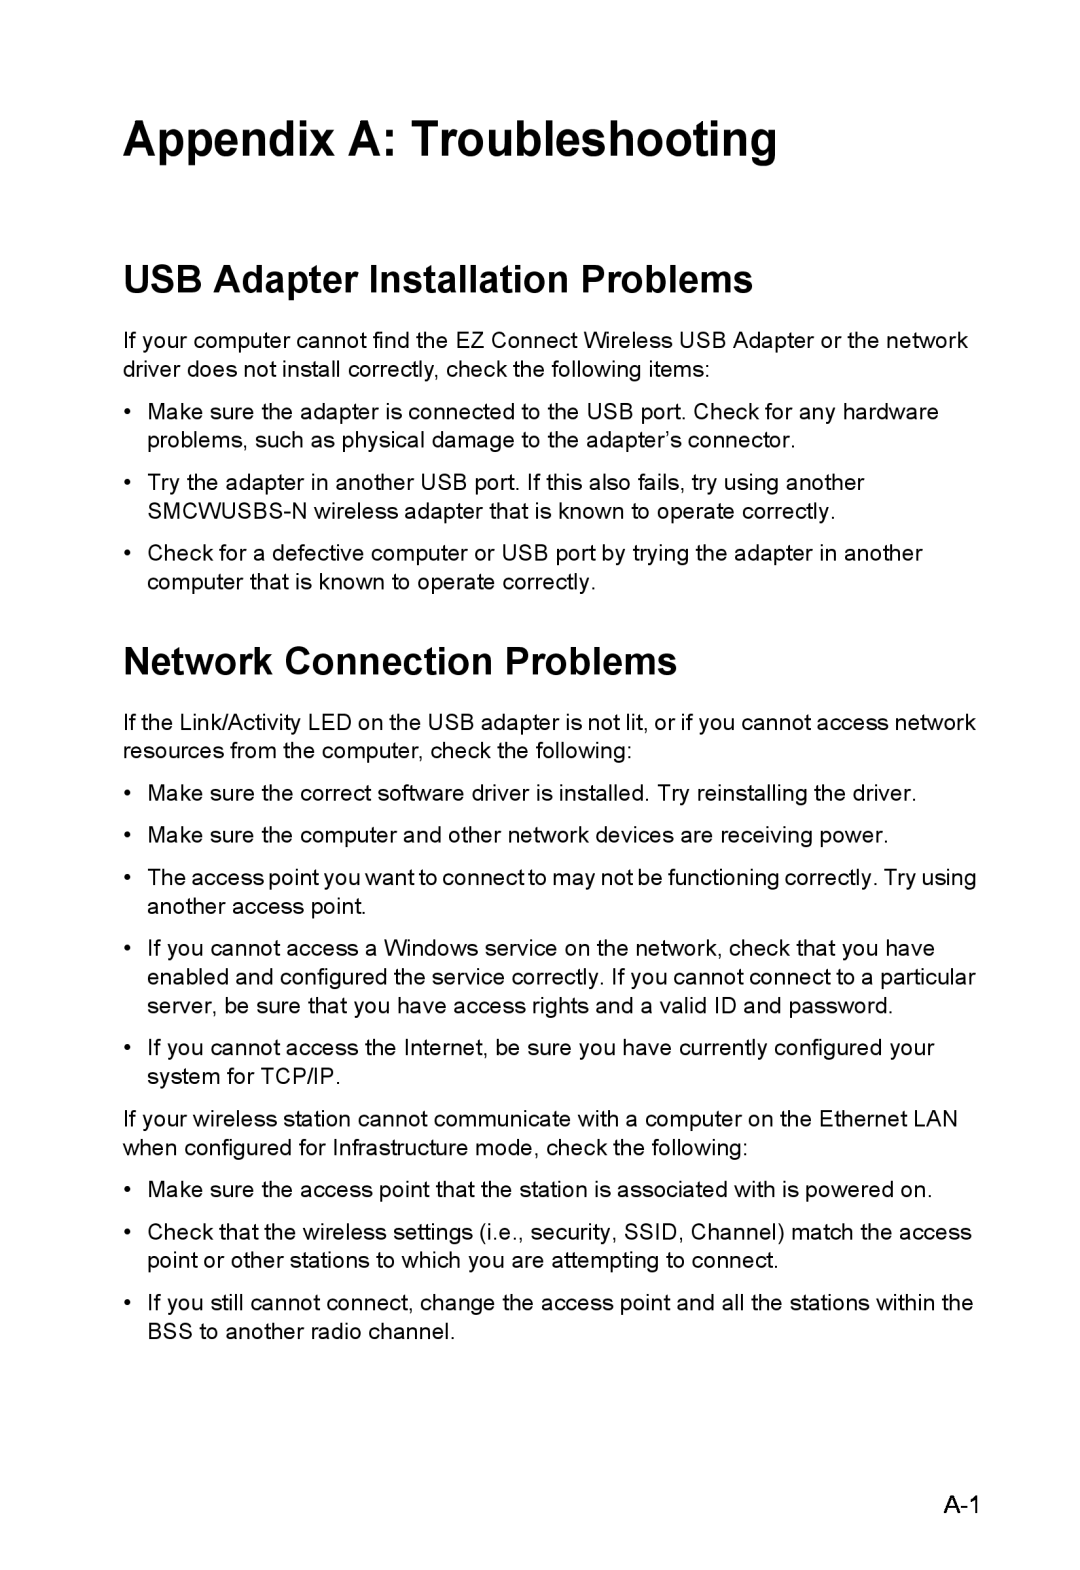 SMC Networks SMCWUSBS-N manual Appendix A Troubleshooting, USB Adapter Installation Problems, Network Connection Problems 